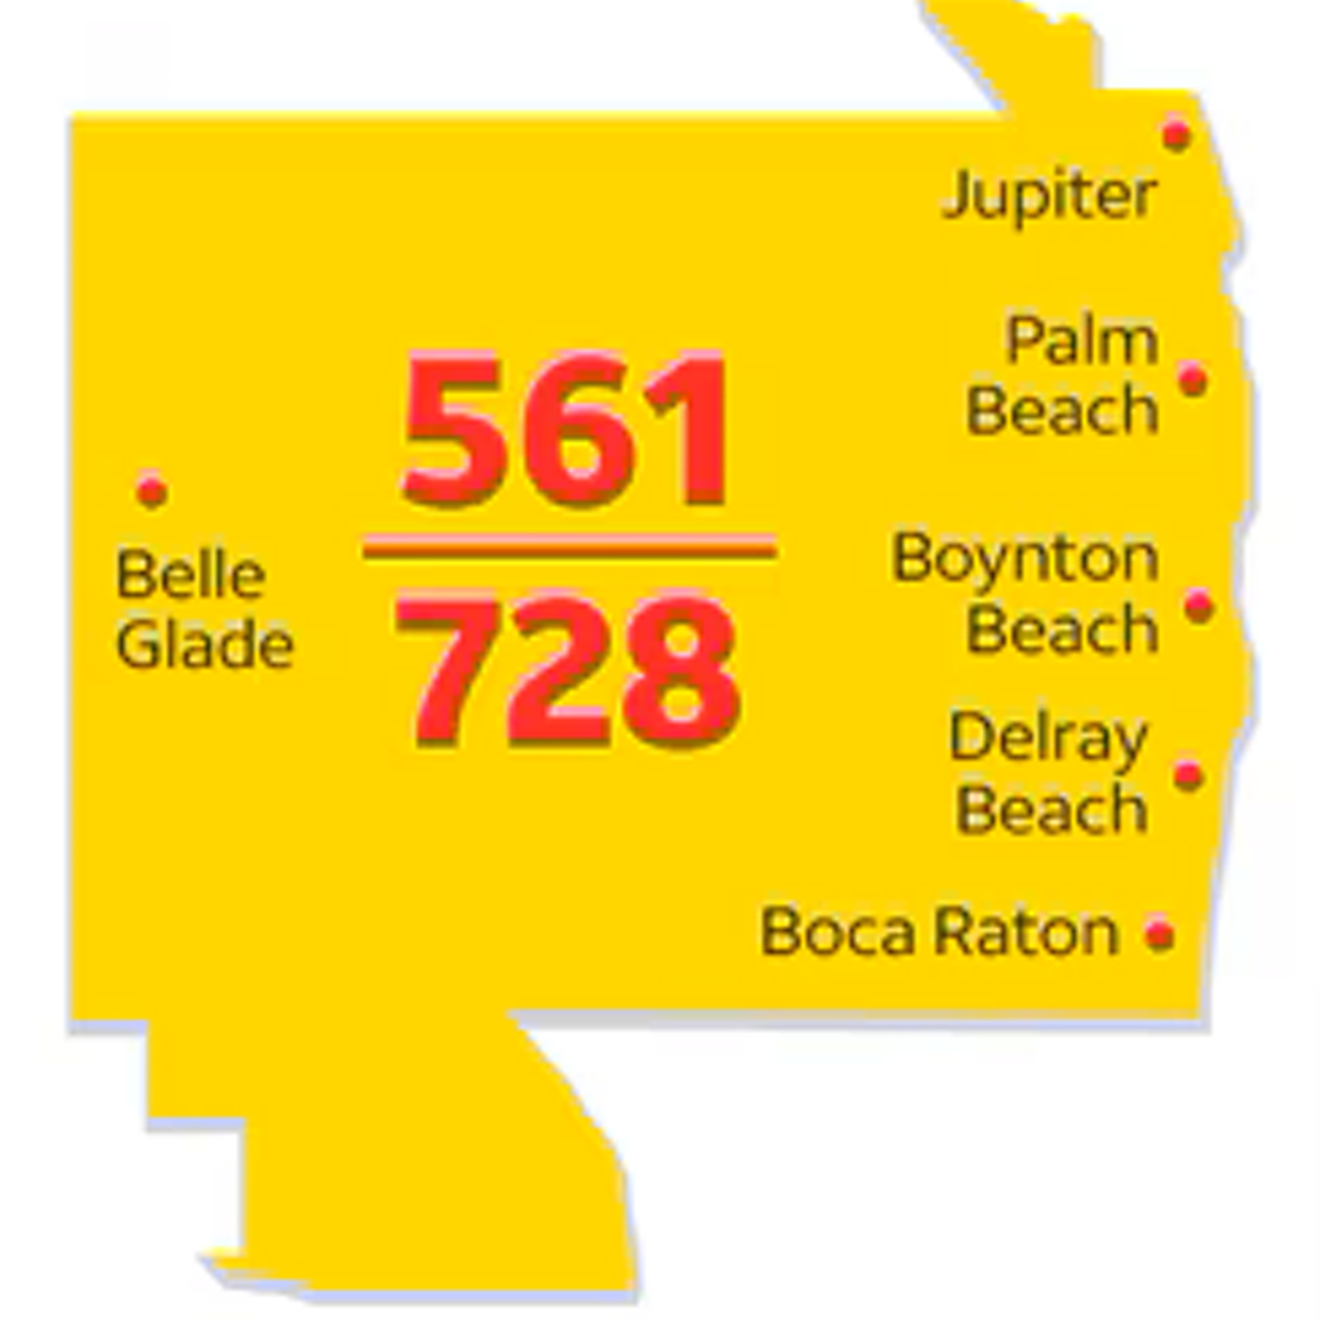 Map of Florida 561 and 728 area code region, including cities of Belle Glade, Jupiter, Palm Beach, Boynton Beach, Delray Beach, and Boca Raton